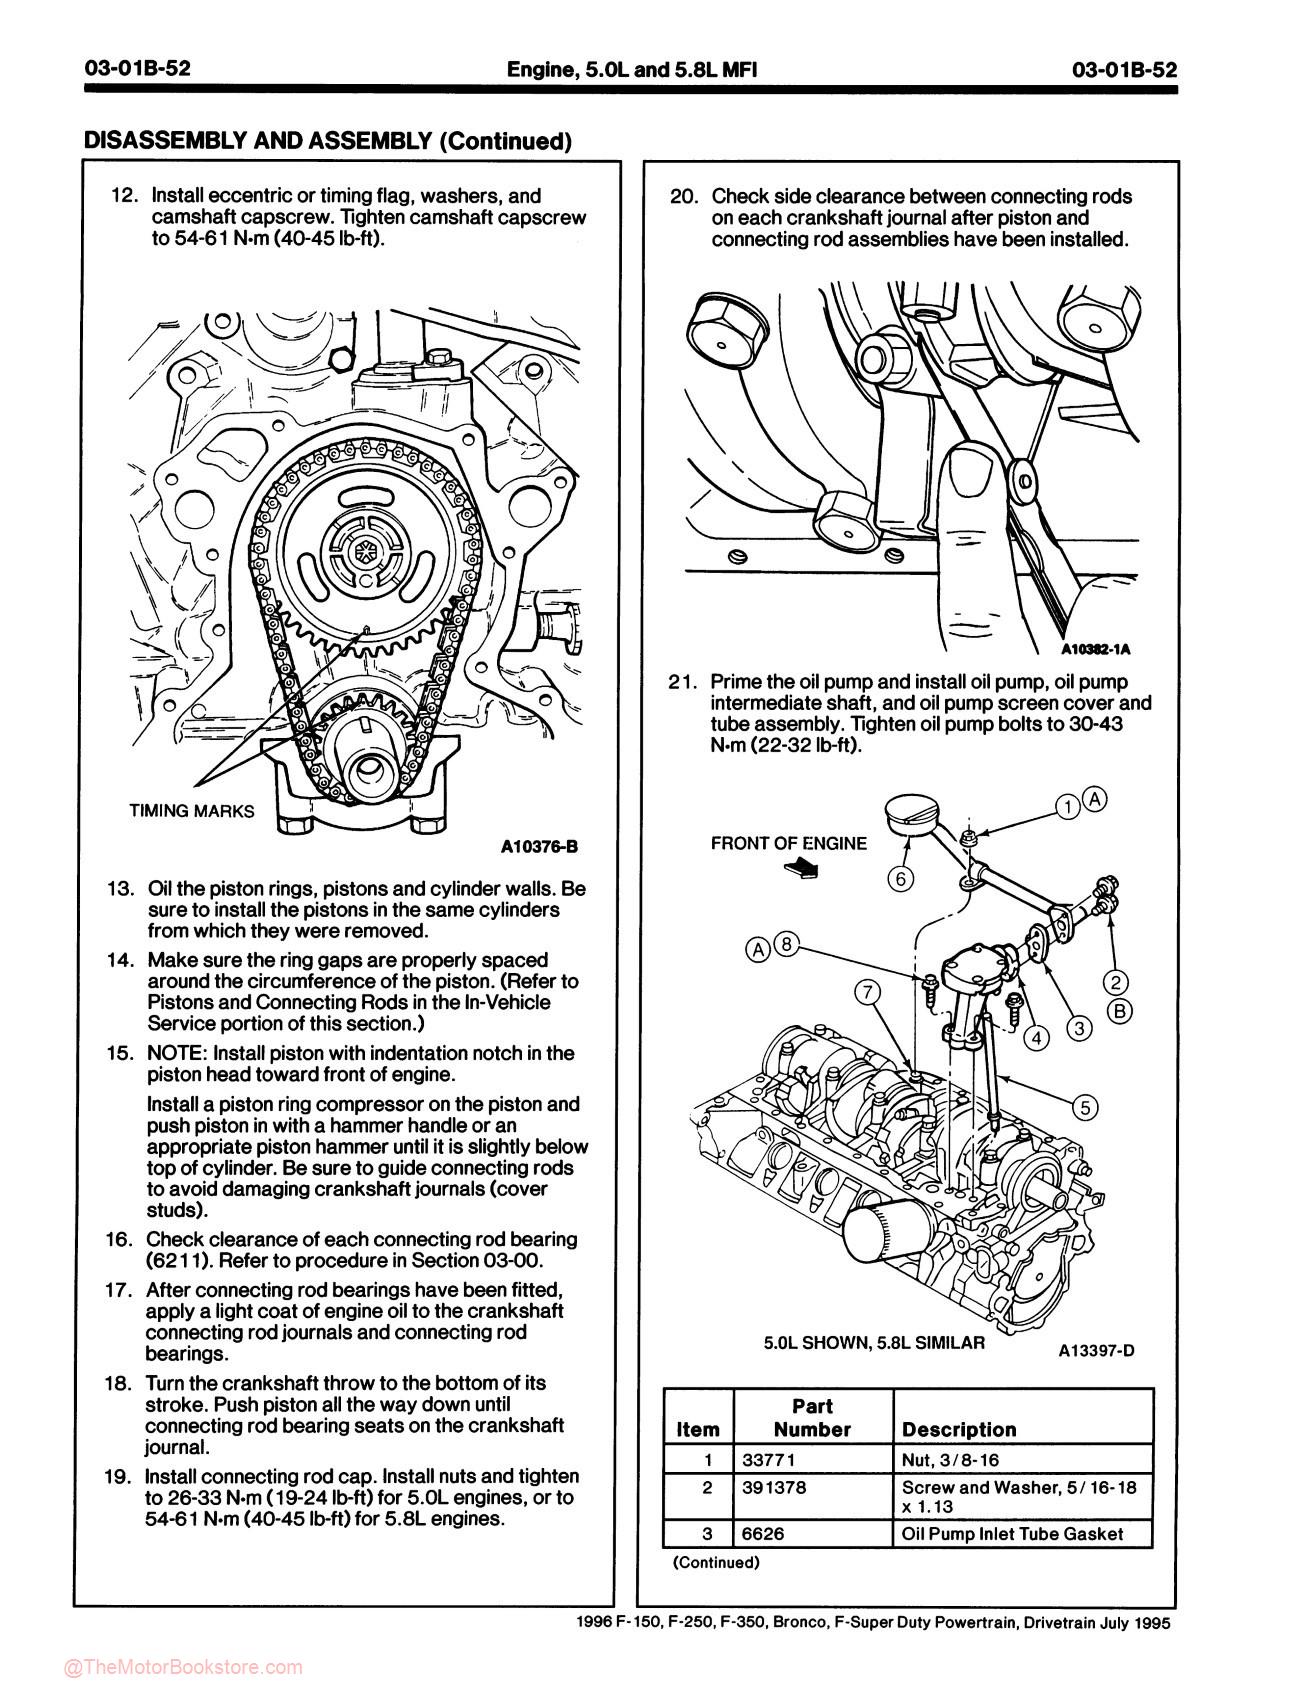 1996 Ford F-150 / F-250 / F-350 Truck, Bronco Service Manual - Sample Page 3